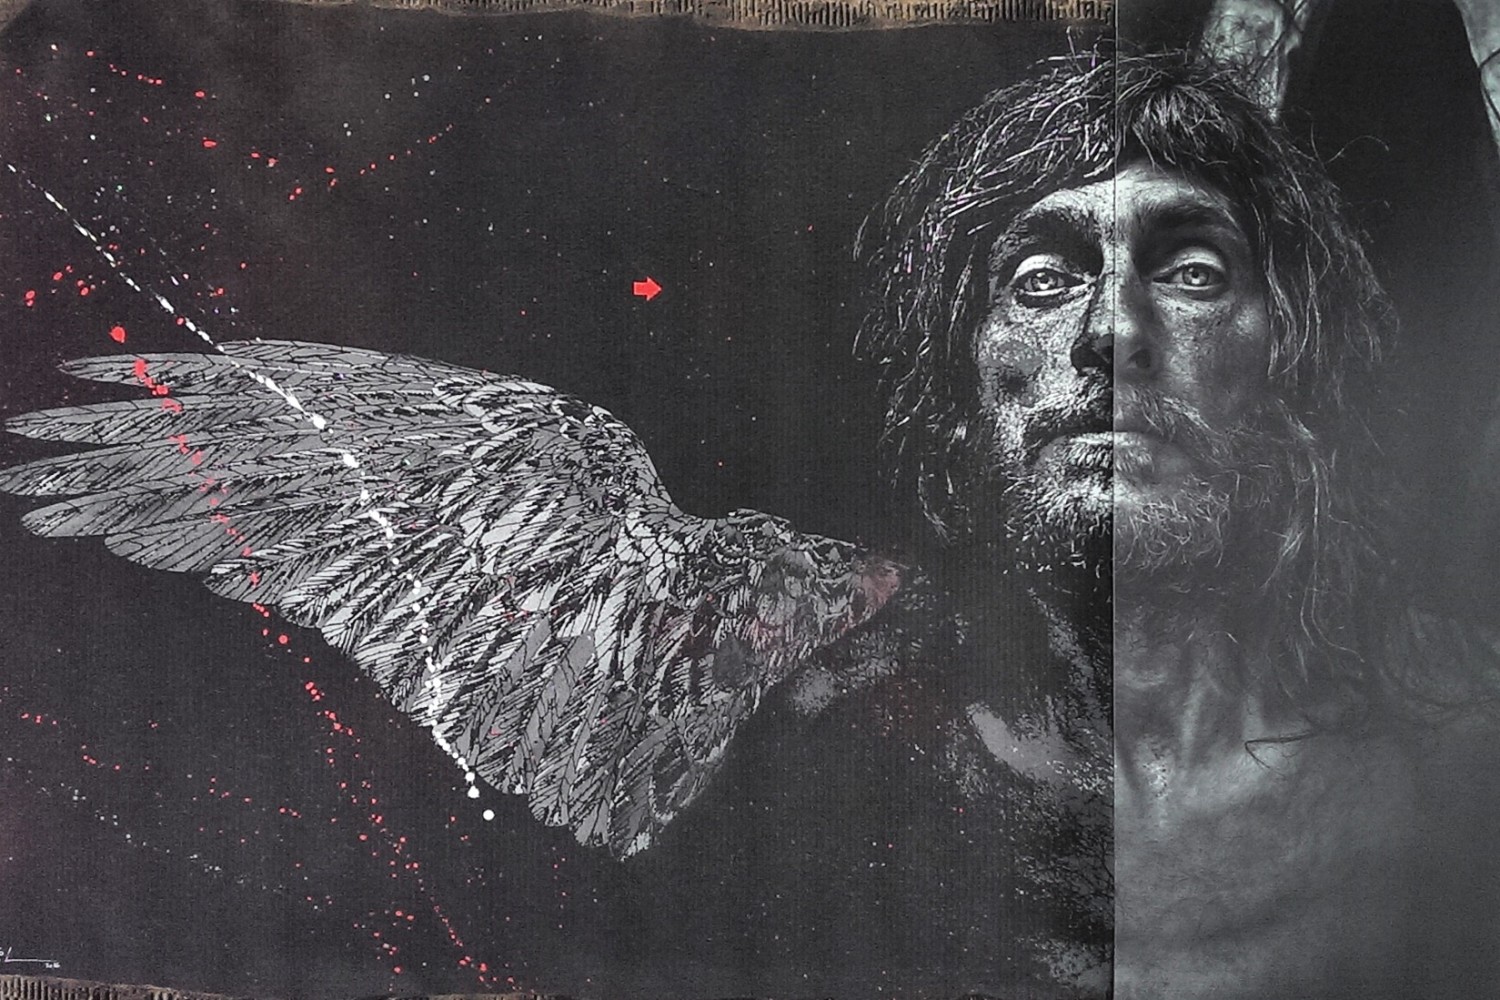 Lee Jeffries Collaborates with Famed Artist to Reveal Hidden Symbols in His Portraits